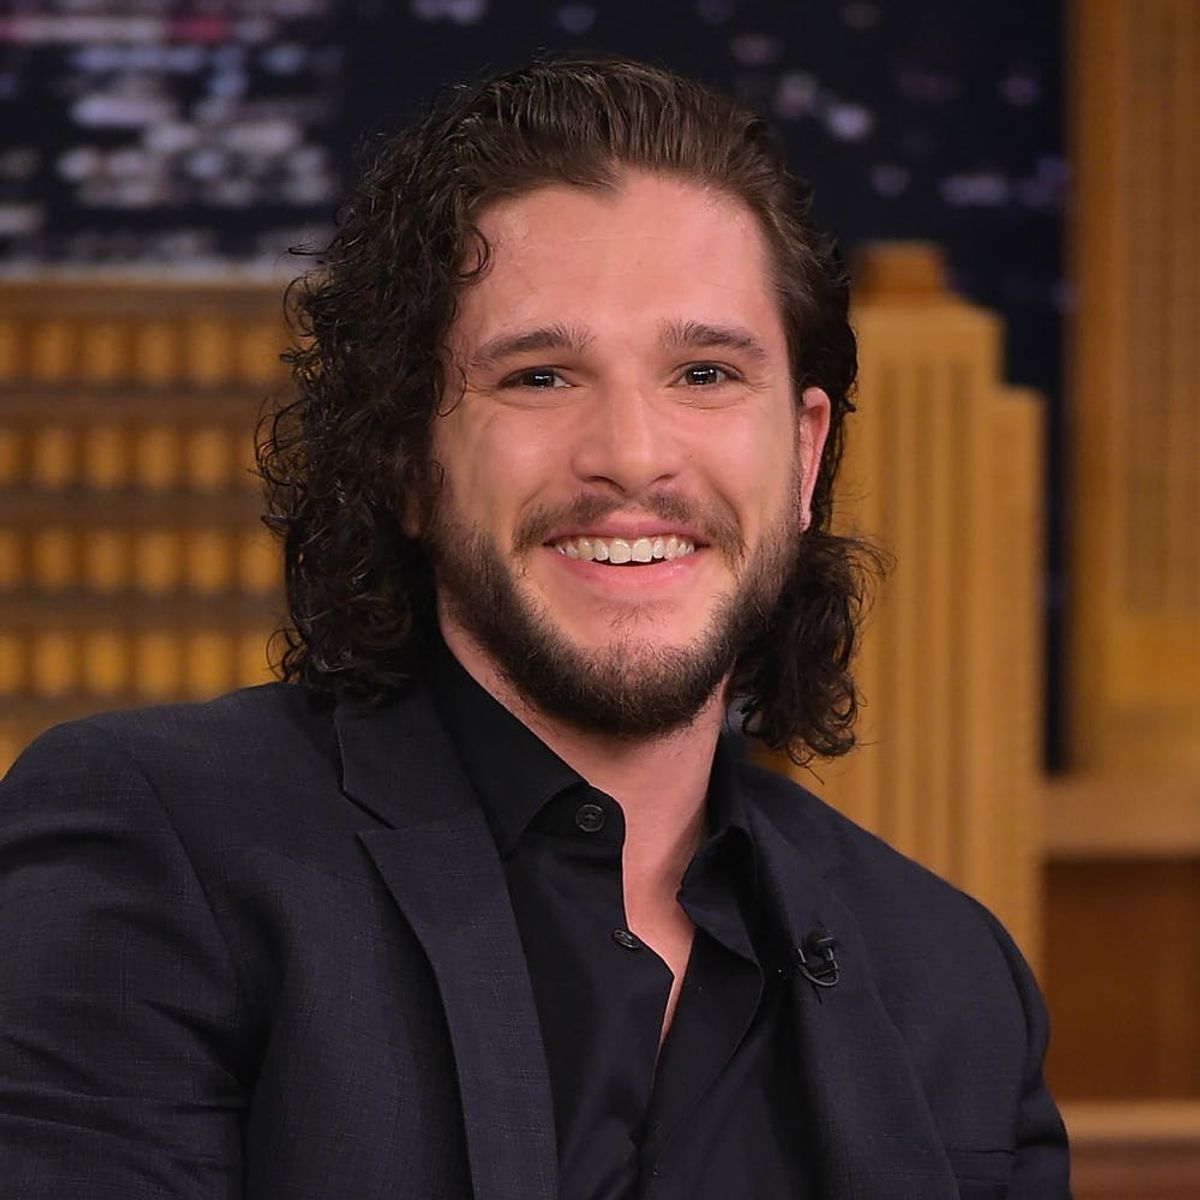 You’ll Never Believe the Stunt Kit Harington Pulled to Get Out of a Ticket